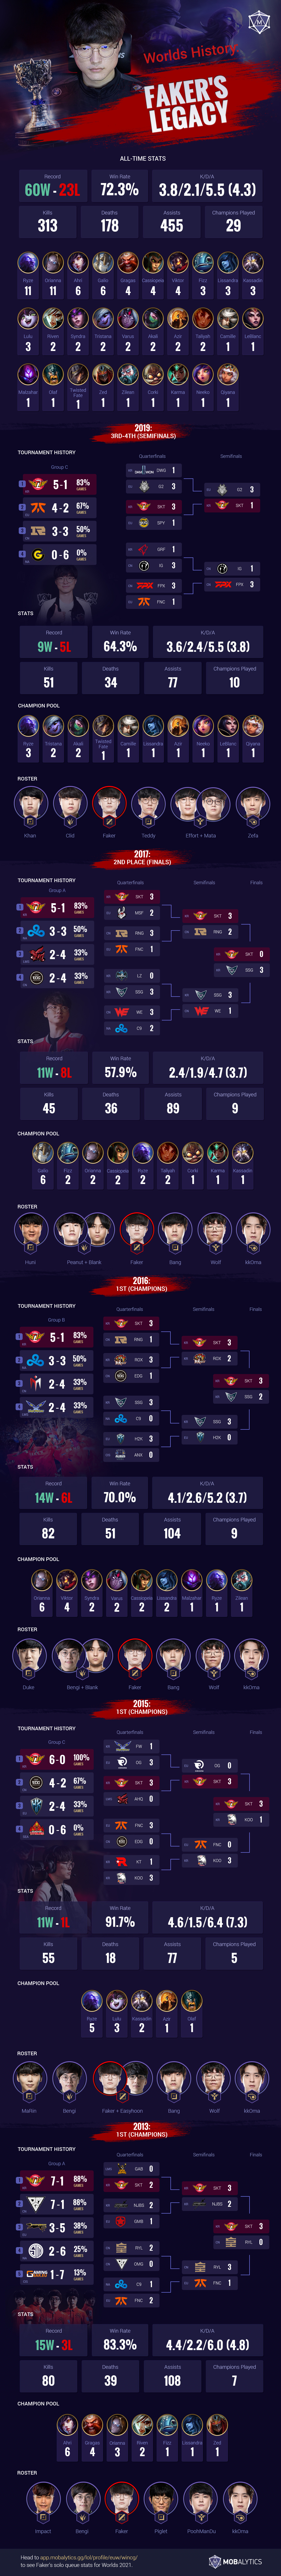 Faker's Legacy: All Worlds History Infographic